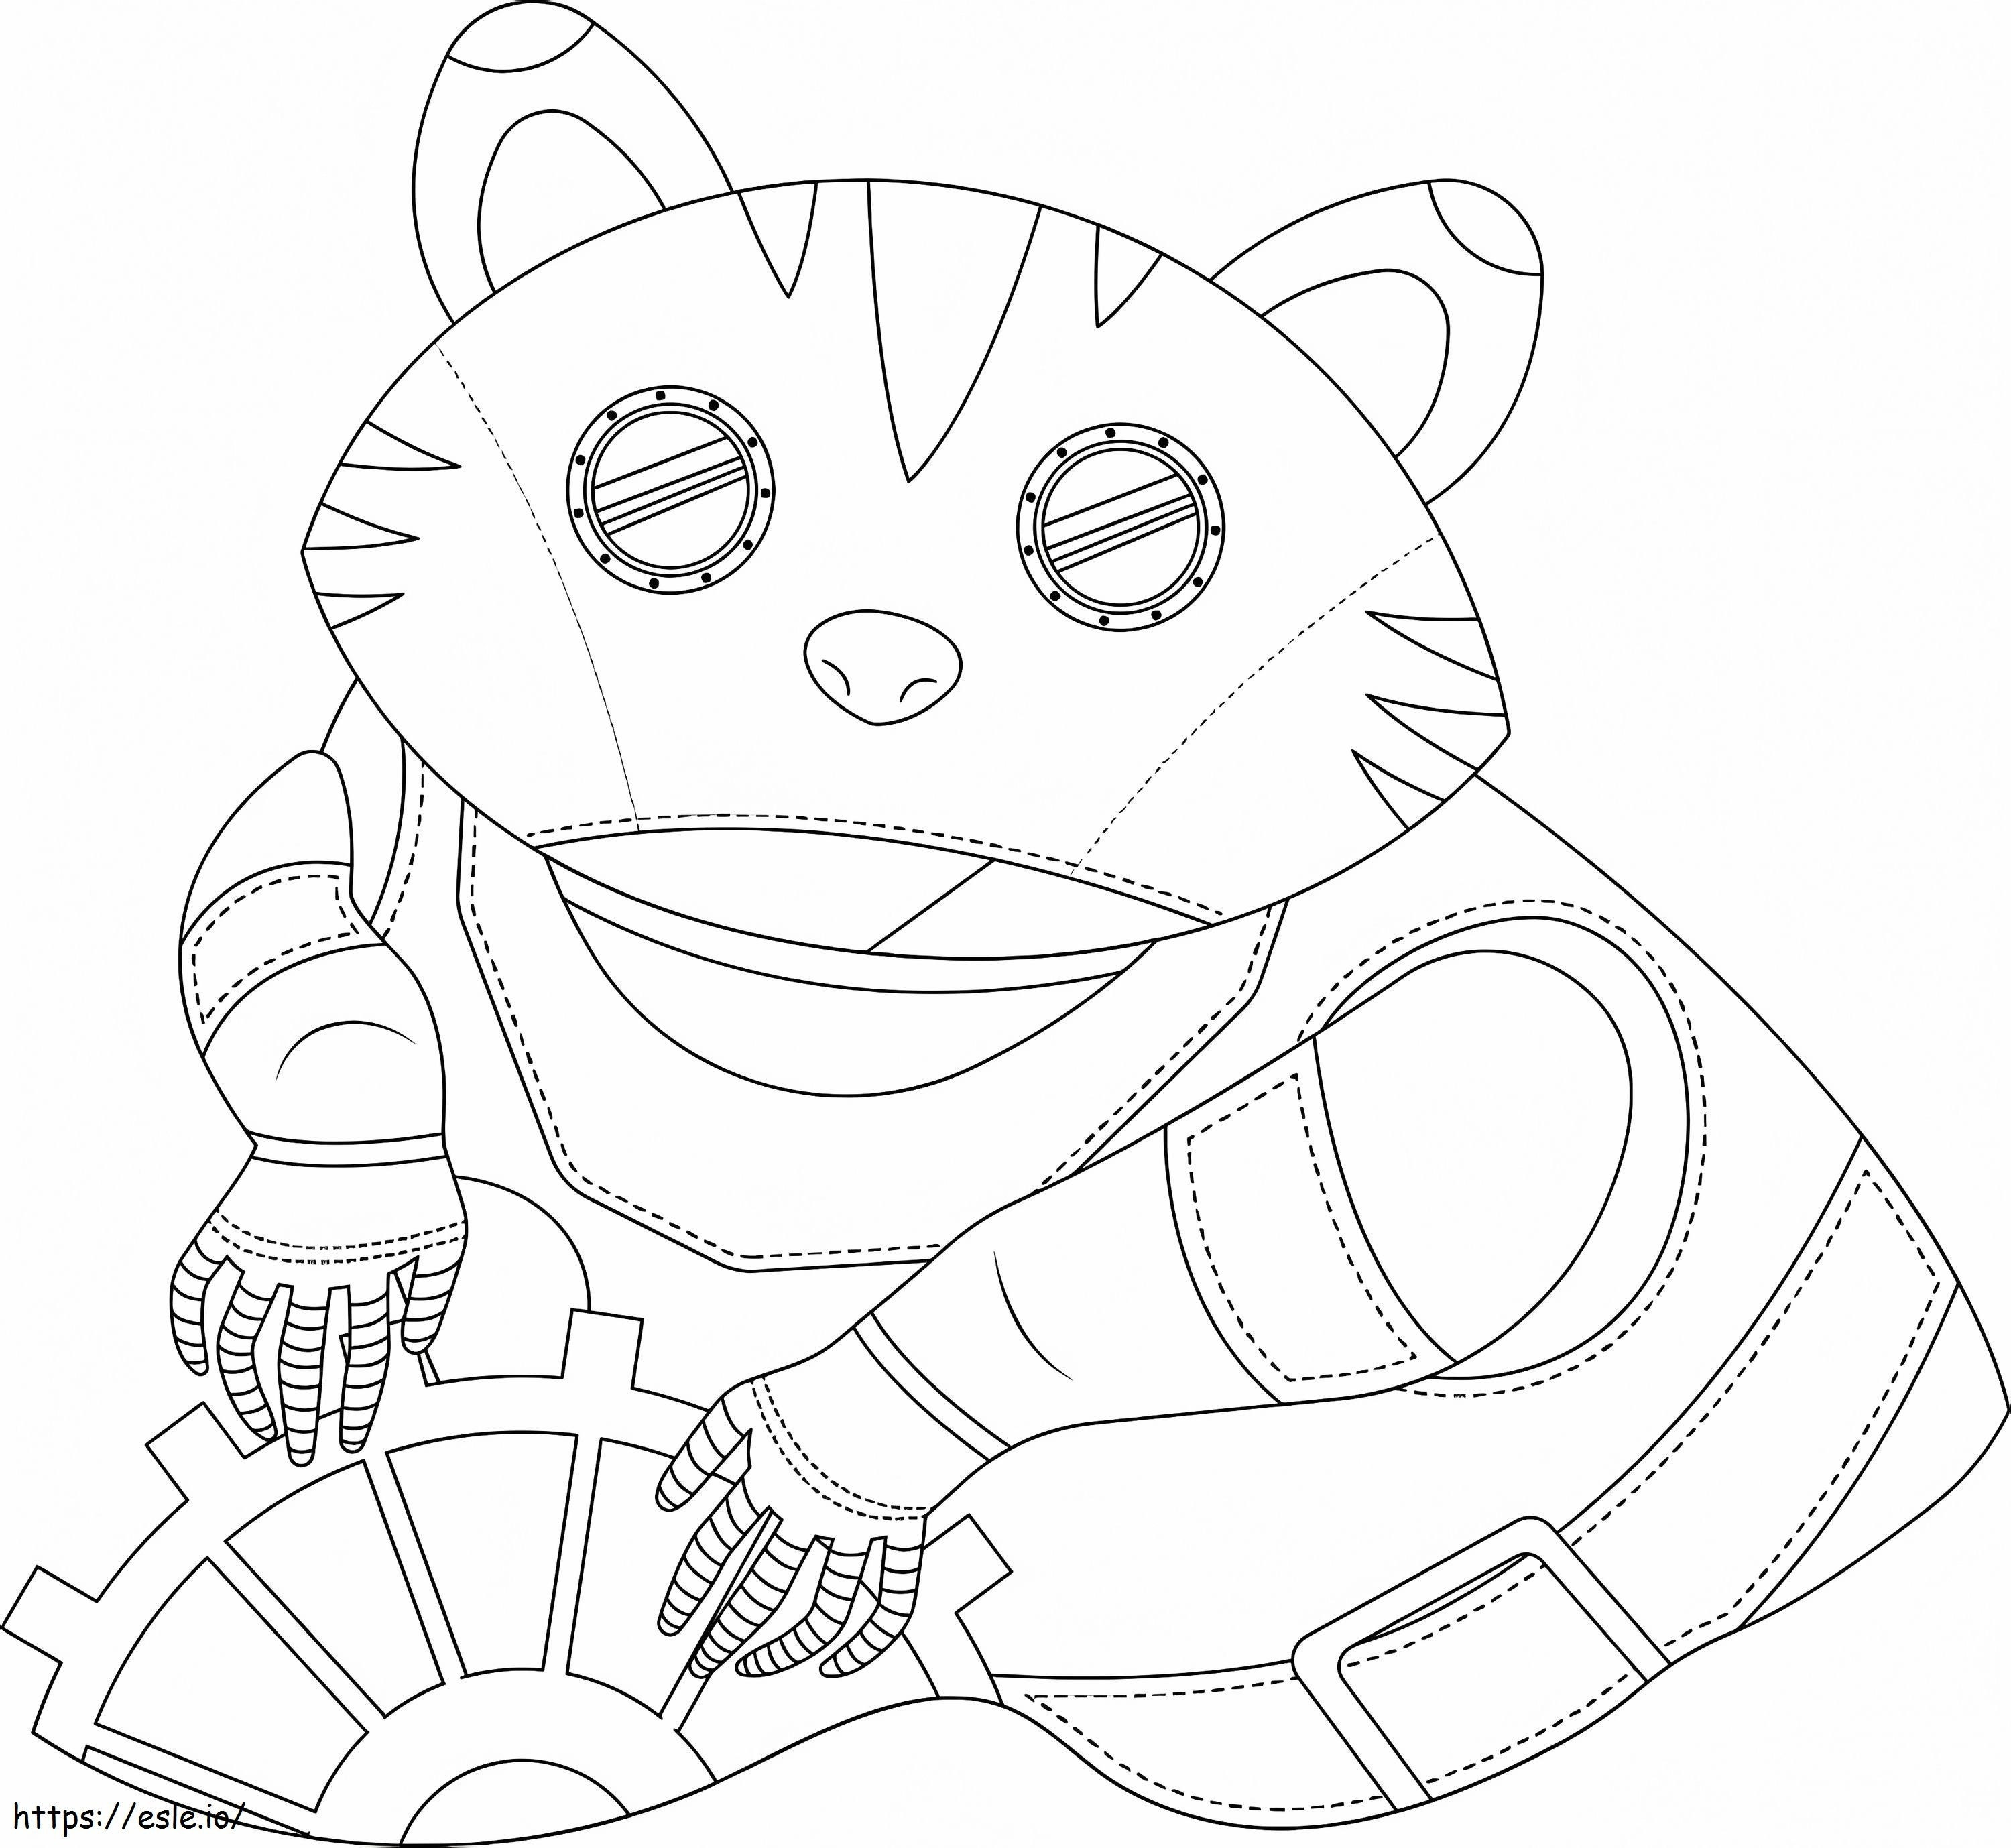 1597968842 Steampunk Raccoon coloring page